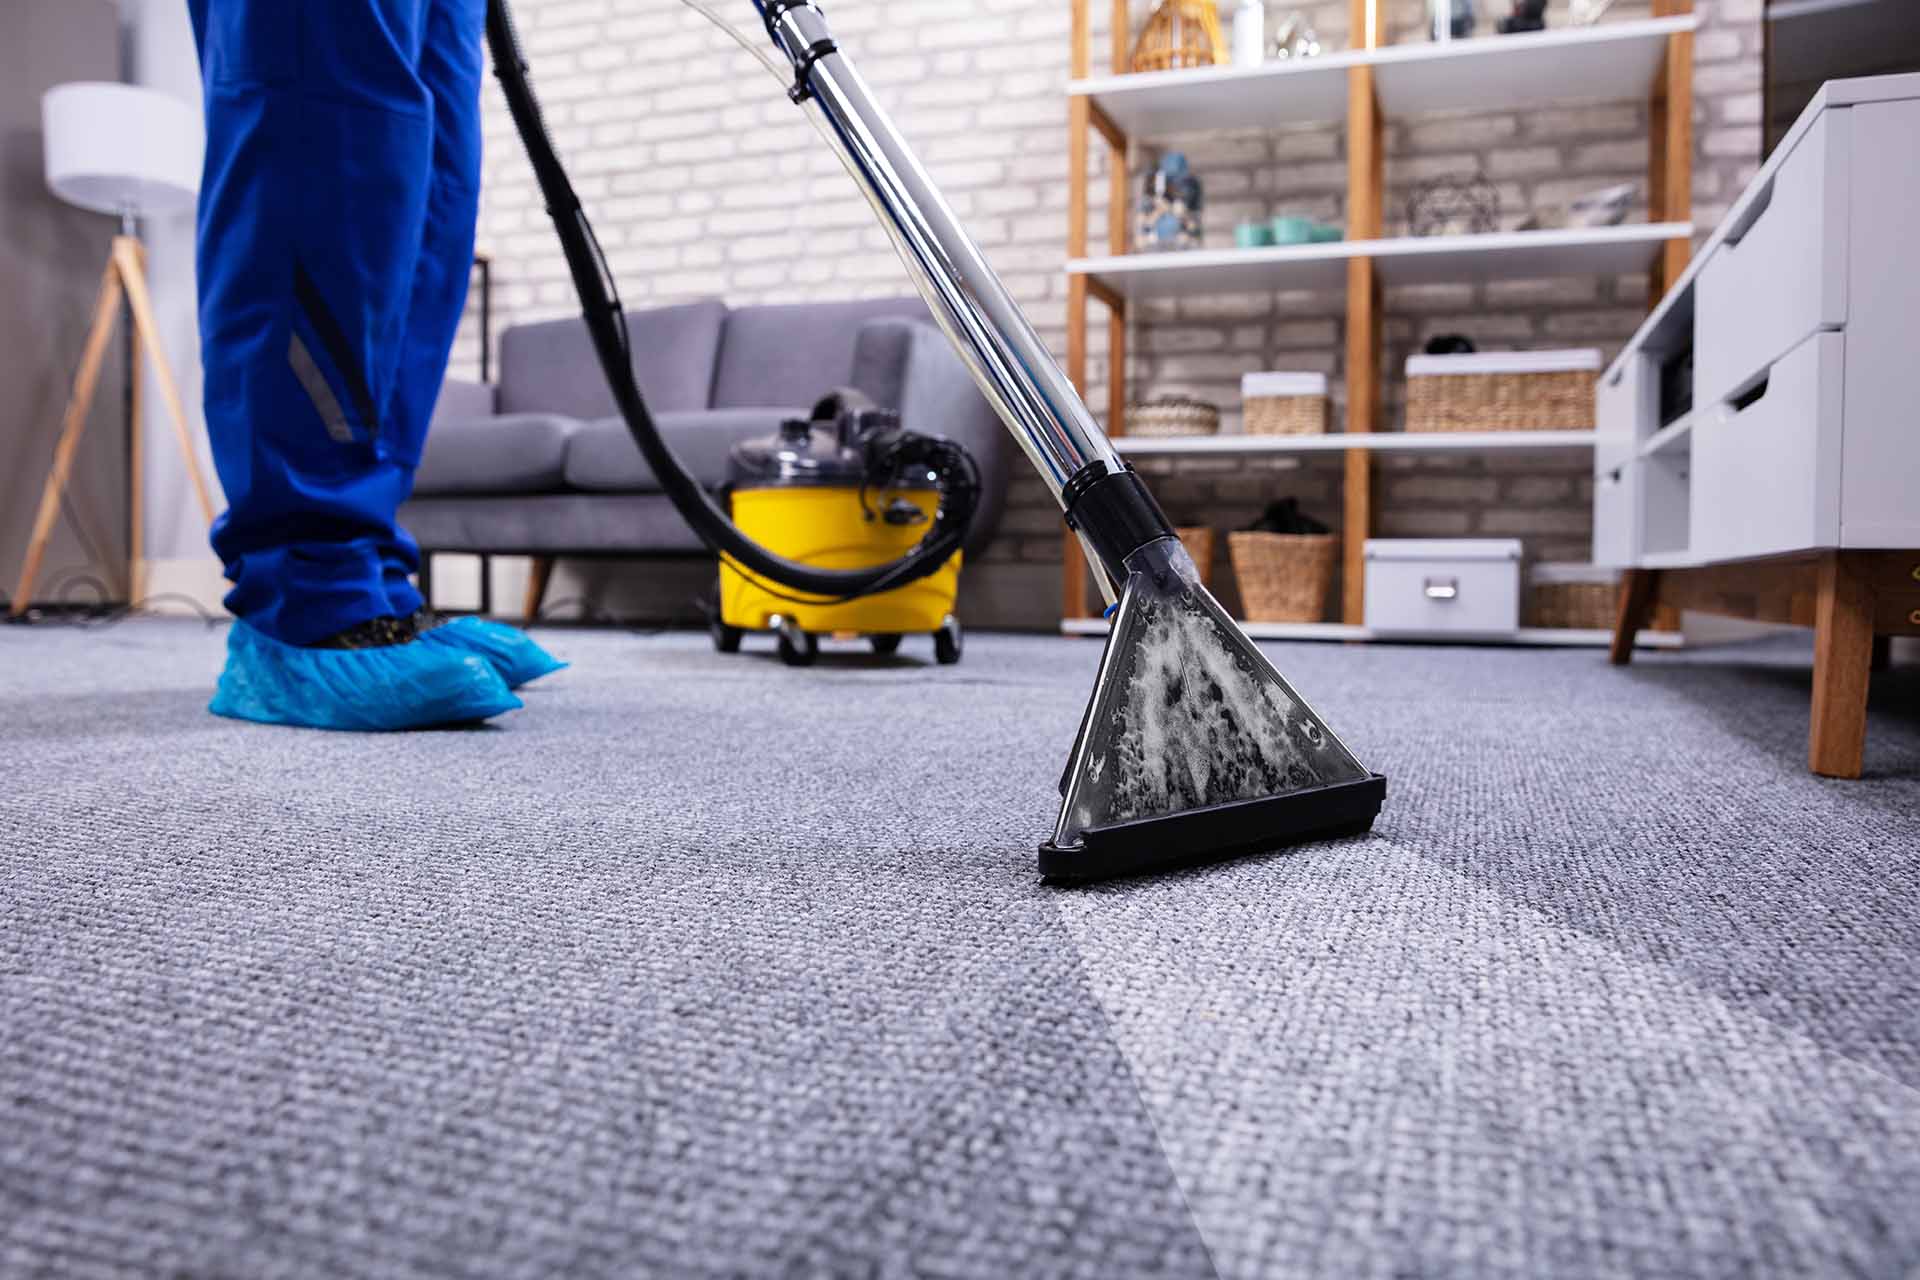 Carpet & Upholstery Cleaning Solutions - DryMaster® Systems - DryMaster  Systems